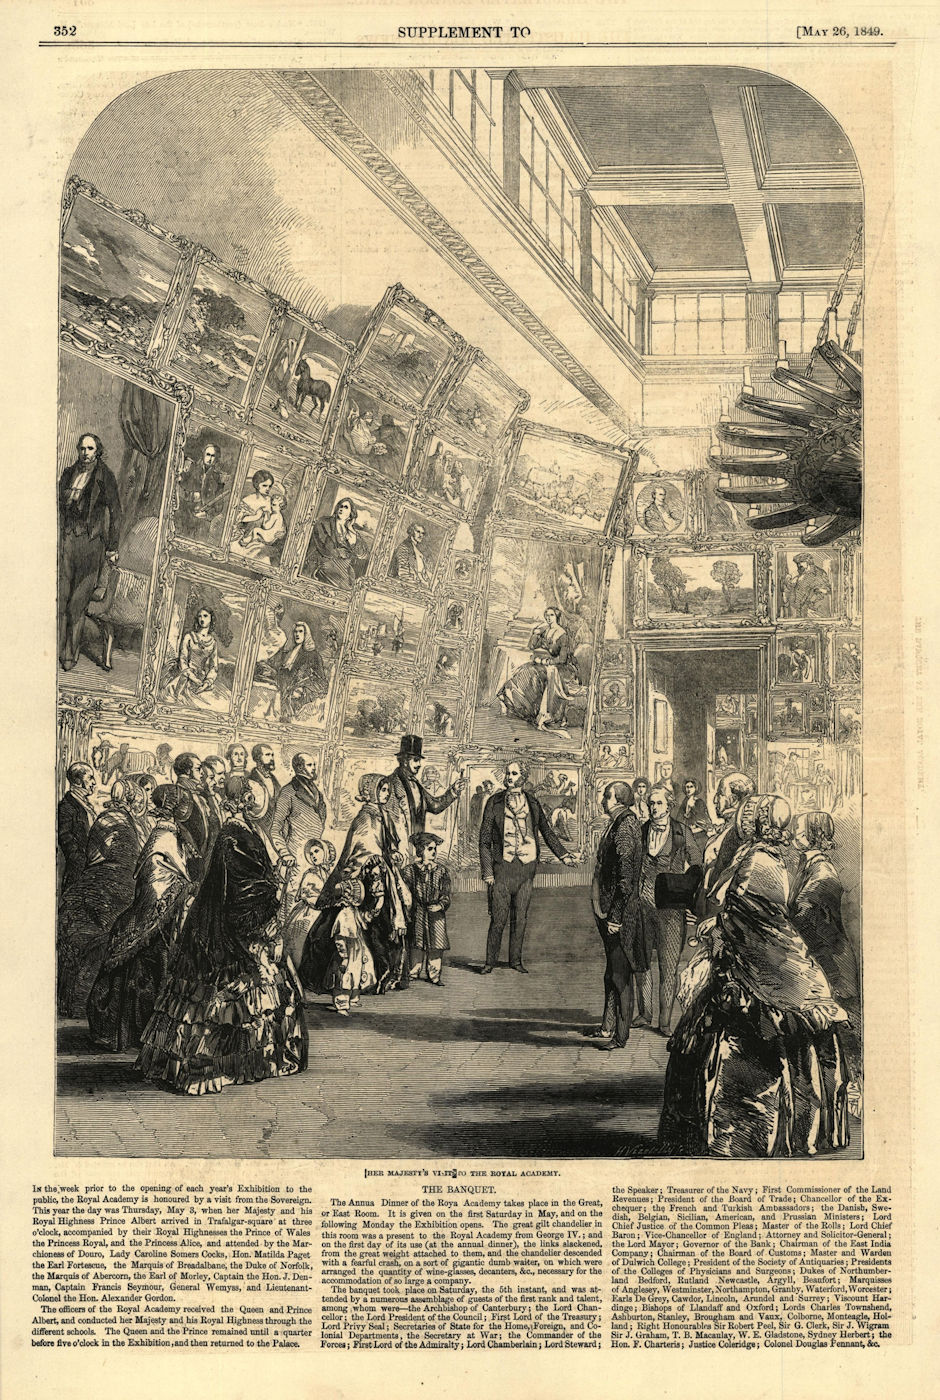 Queen Victoria's visit to the Royal Academy Exhibition. London. Society 1849